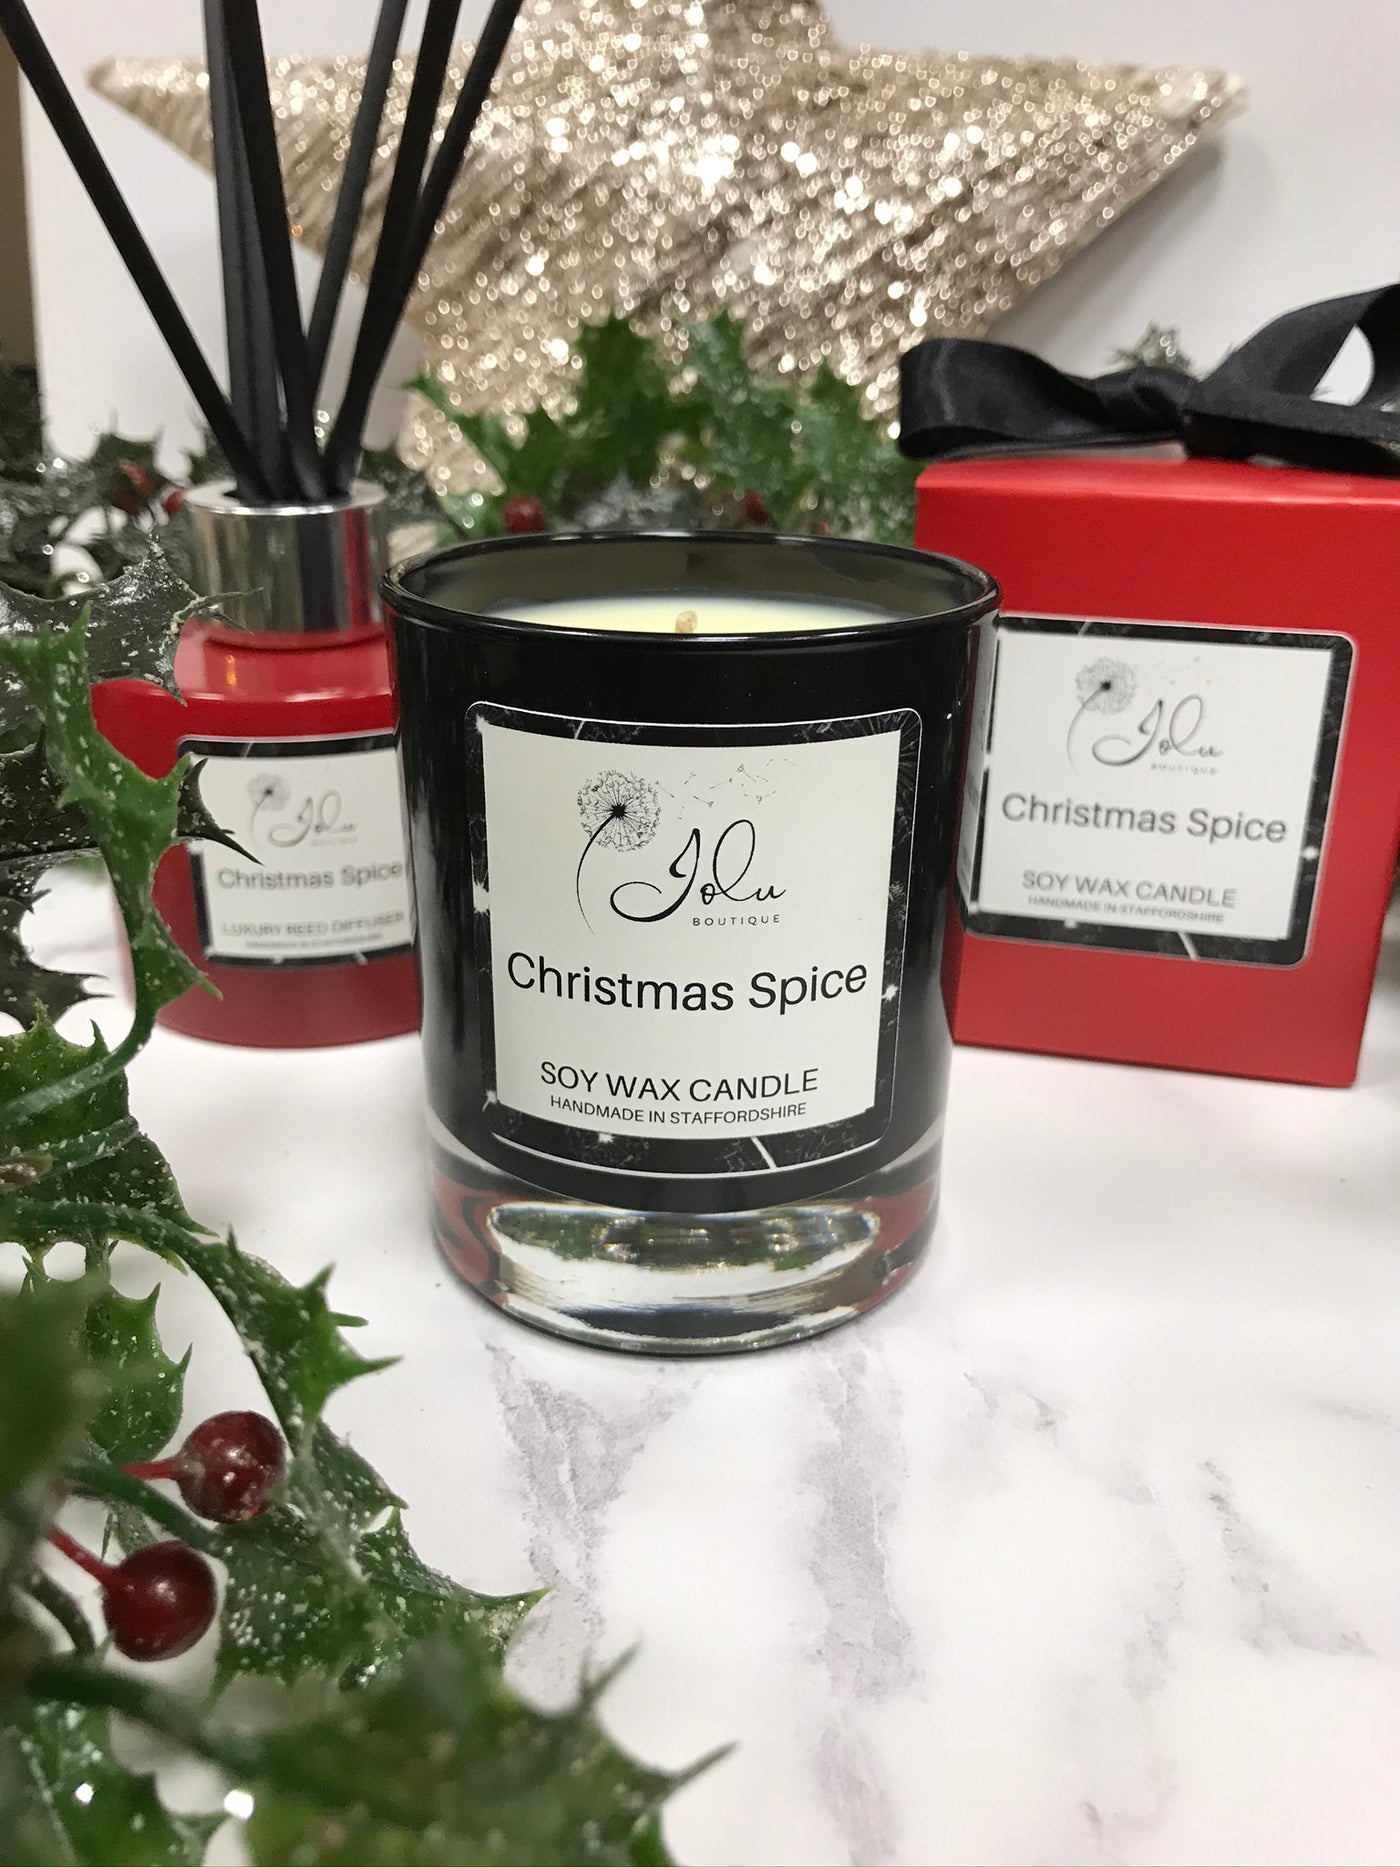 Jolu Boutique Christmas Spice Reed Diffuser